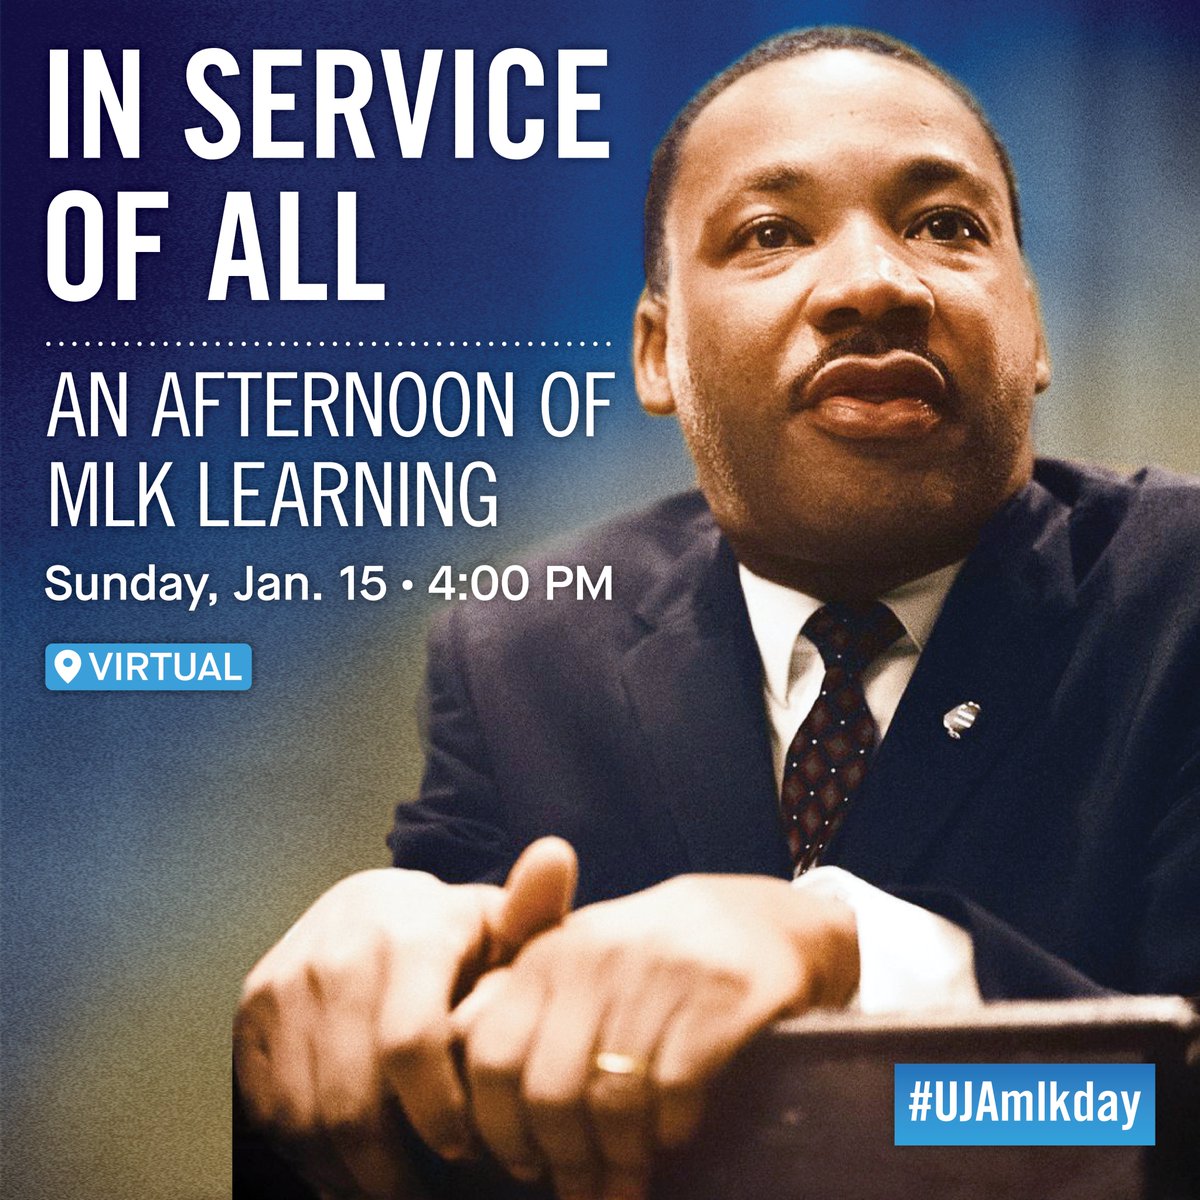 What do Dr. King and Jewish texts have to say about changing the world? Before you volunteer on #UJAmlkday, join us Sunday, Jan. 15, for an afternoon of learning with @ruth_messinger, @nigelssavage, @rtimoner, @RobertMWaterman, and more. Learn more: nyjewi.sh/mlklearning23